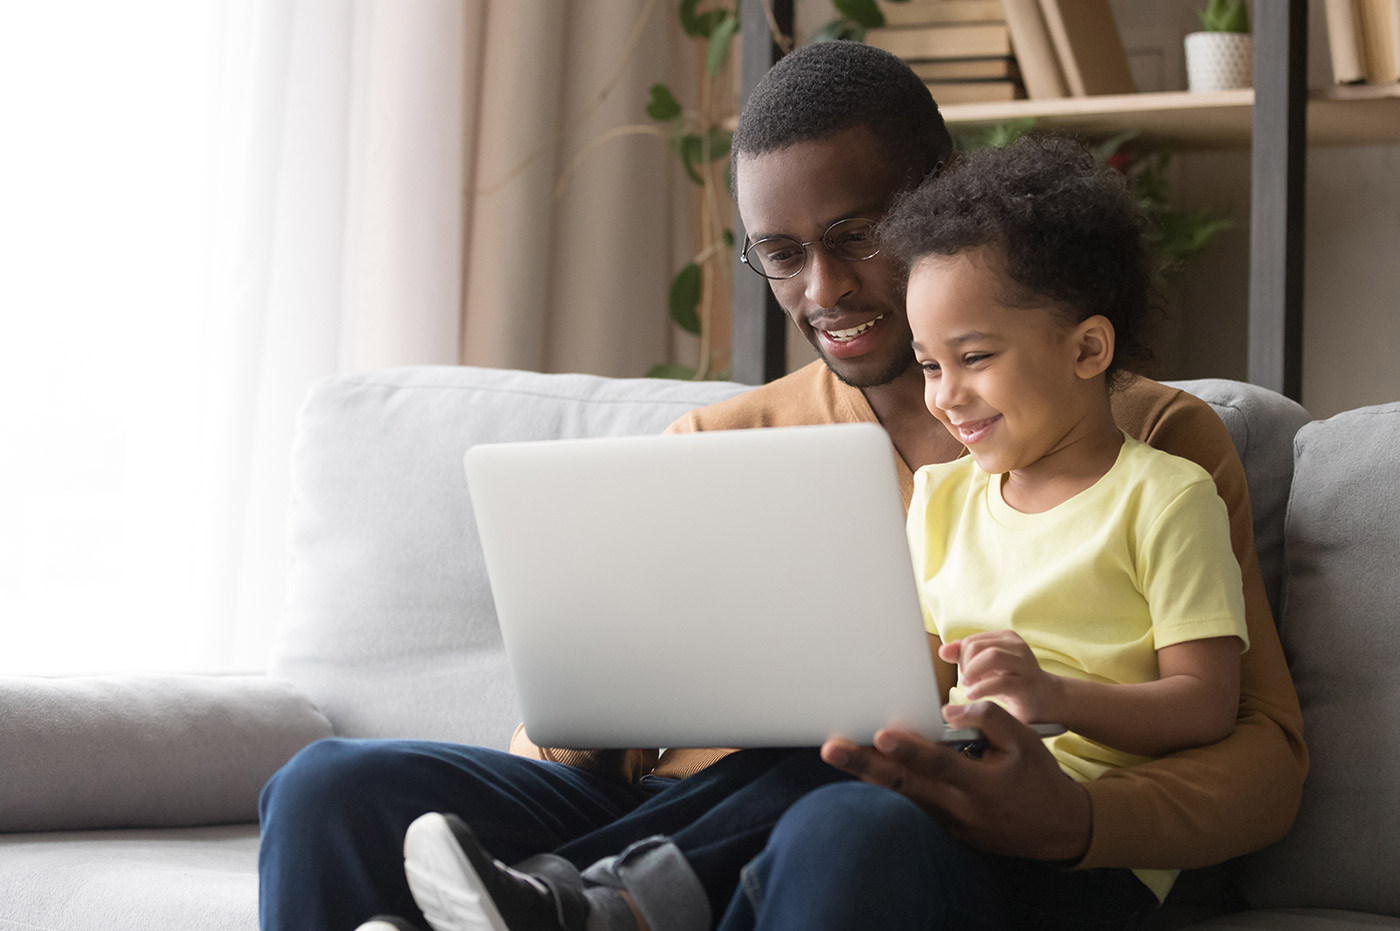 An African-American father and son sitting on the couch and looking at a laptop together.